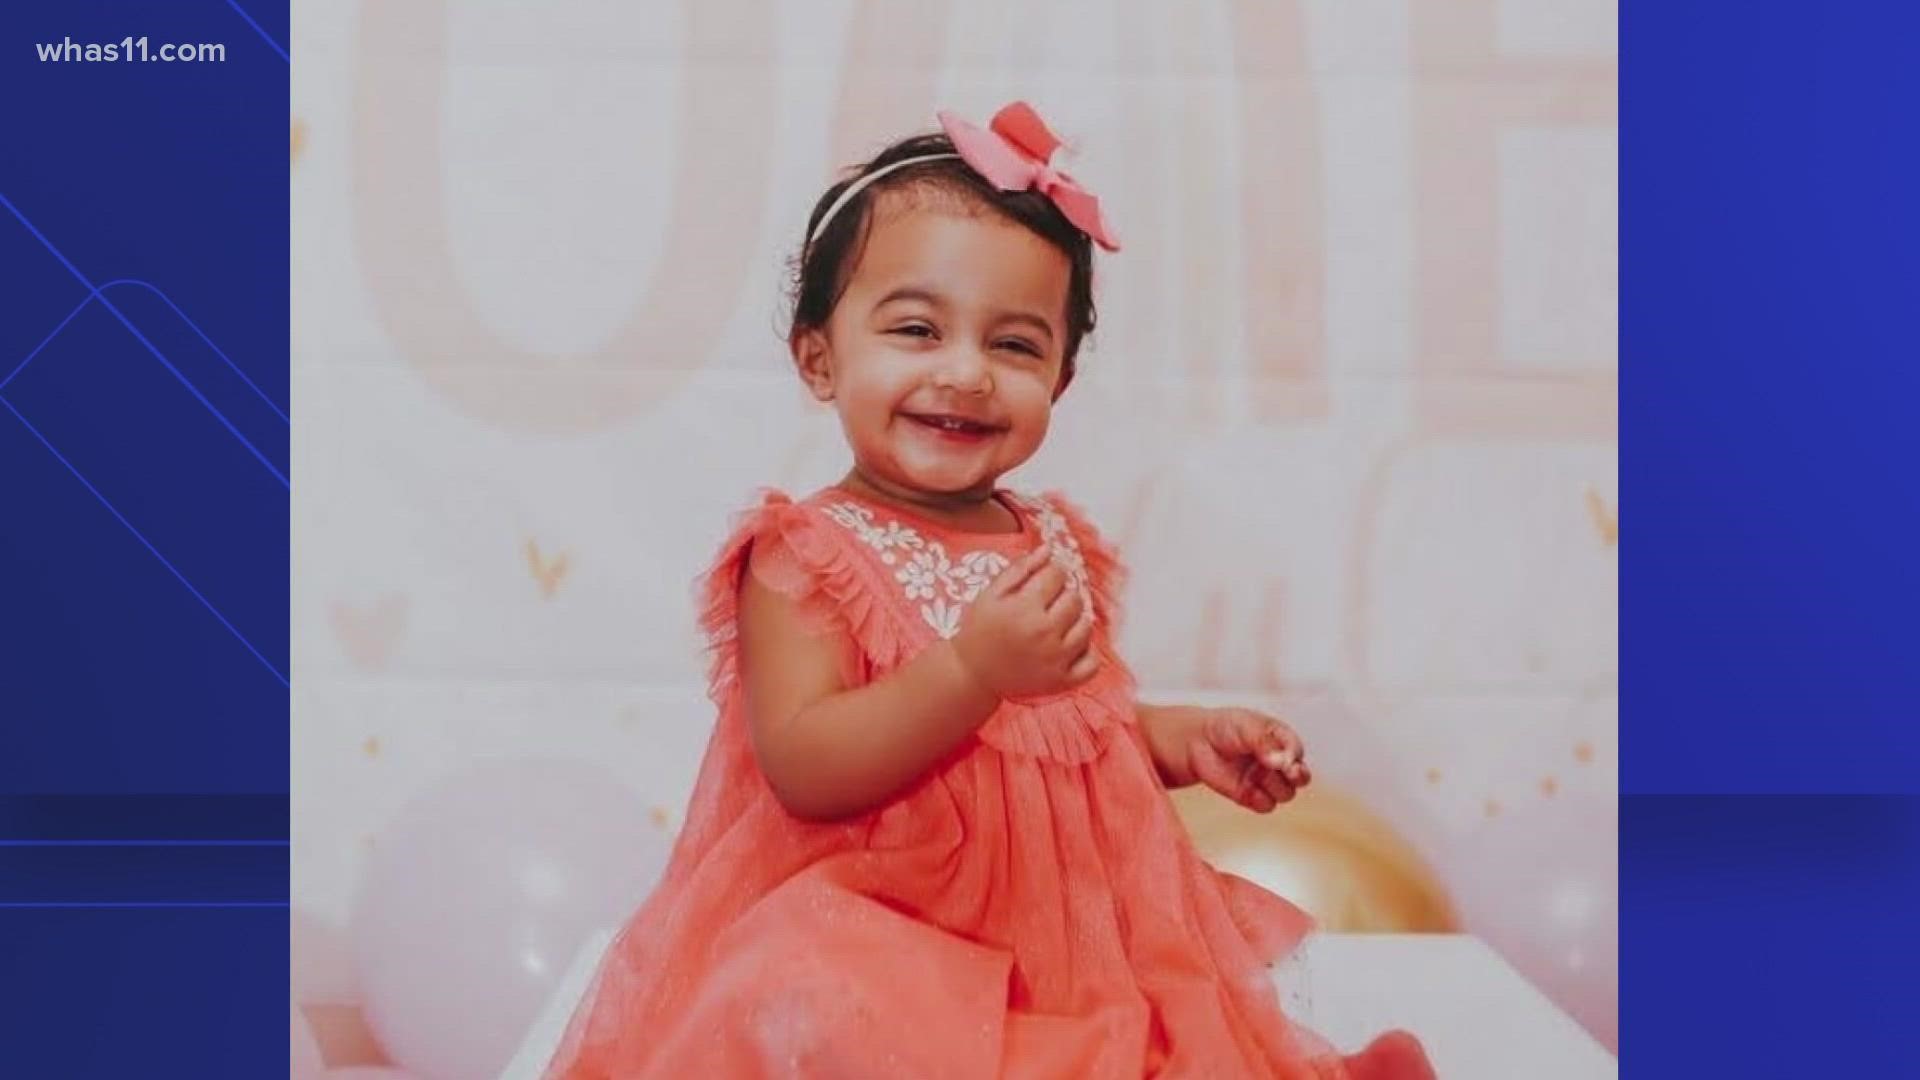 A Louisville family has taken legal action against Kayfield Academy II, claiming they're responsible for a 13-month-old's death.